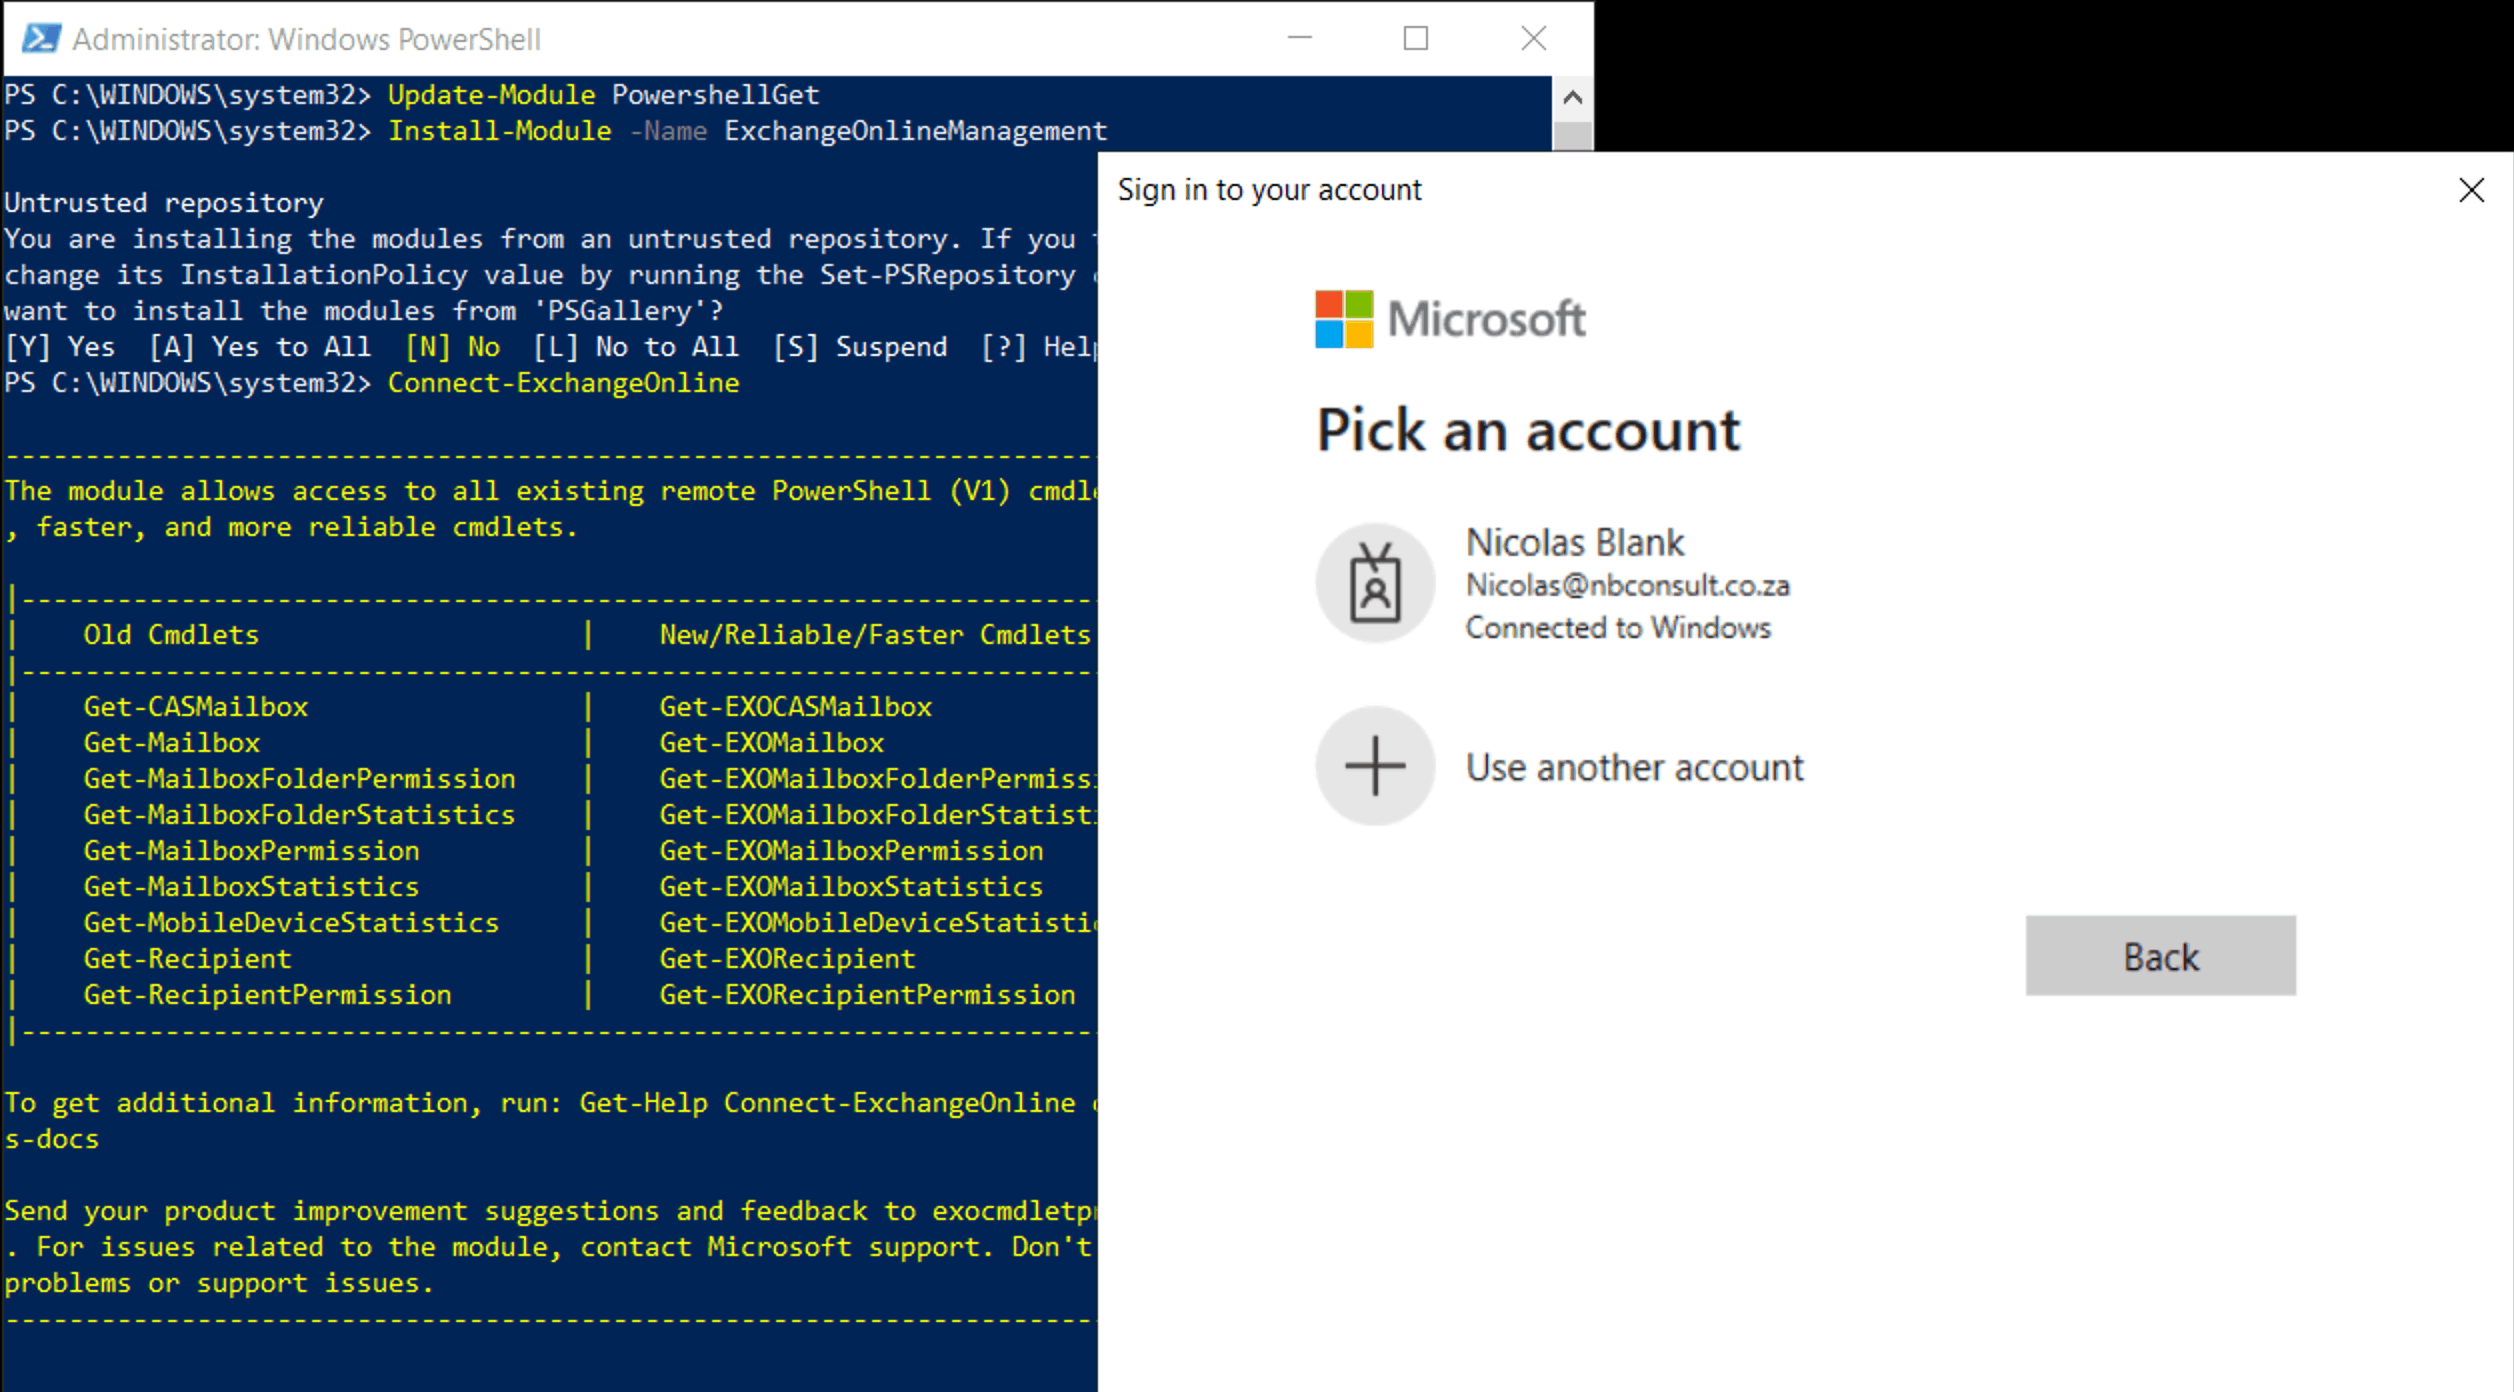 PowerShell session in Windows and installed the Exchange Online v2 module